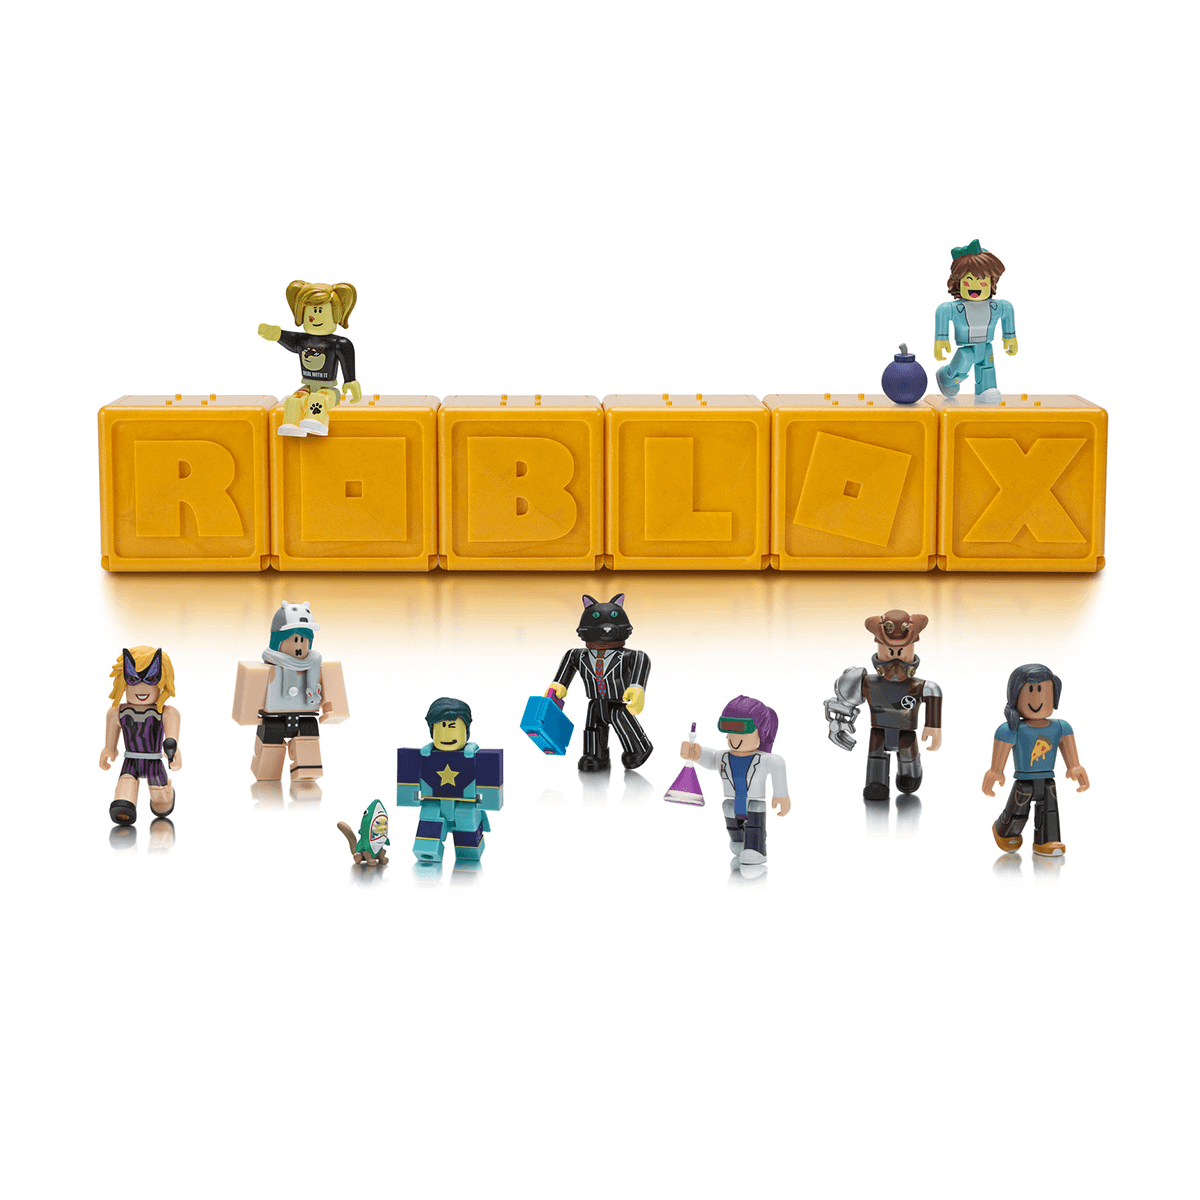 11 Roblox Surprises No Codes But All Figures Are In Great - details about roblox series 1 mini figures girls boys 25 toys bogoshipping discount no code